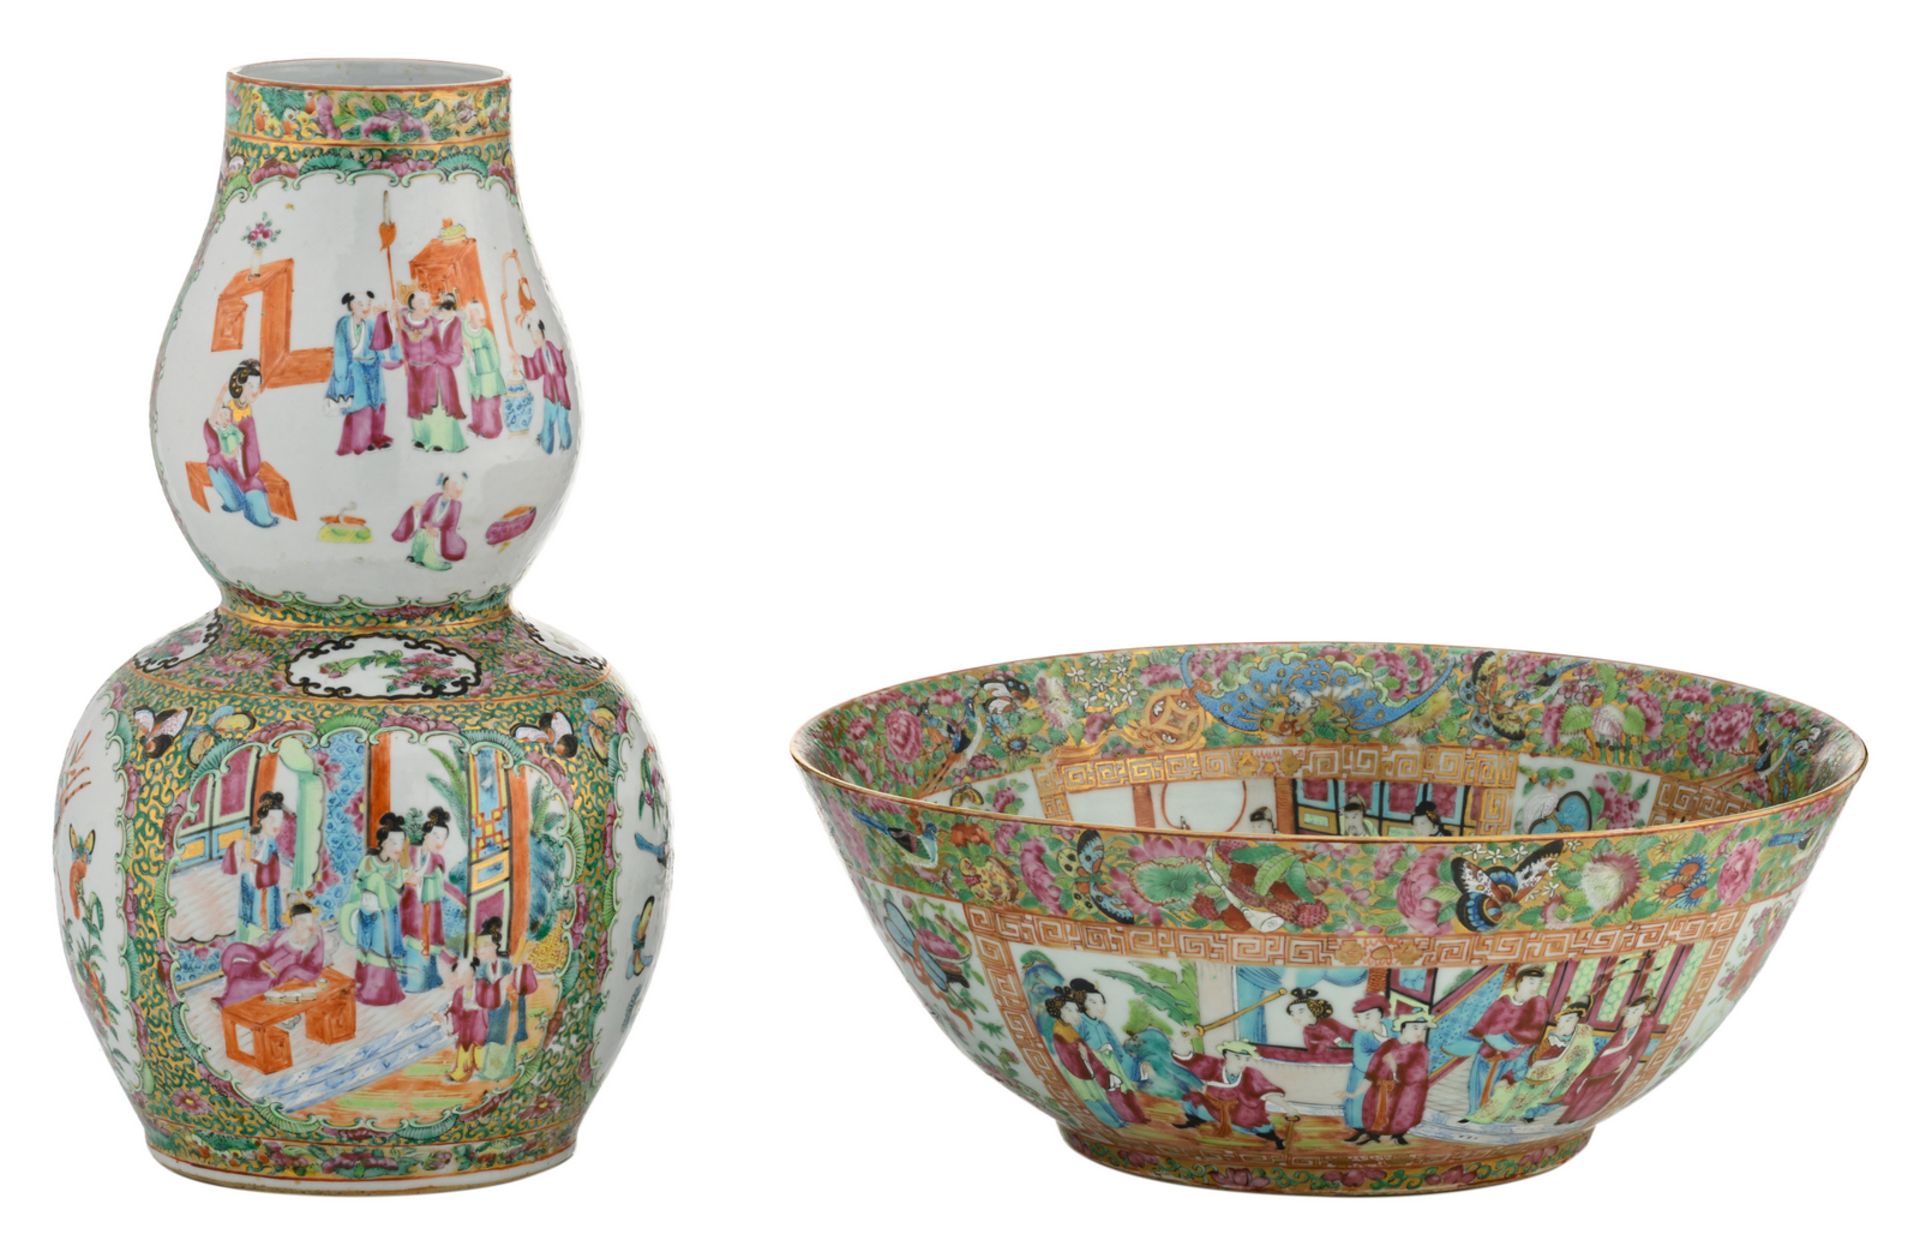 A Chinese Canton floral decorated bowl, the roundels with various court scenes, 19thC, H 14,5 - ø 37